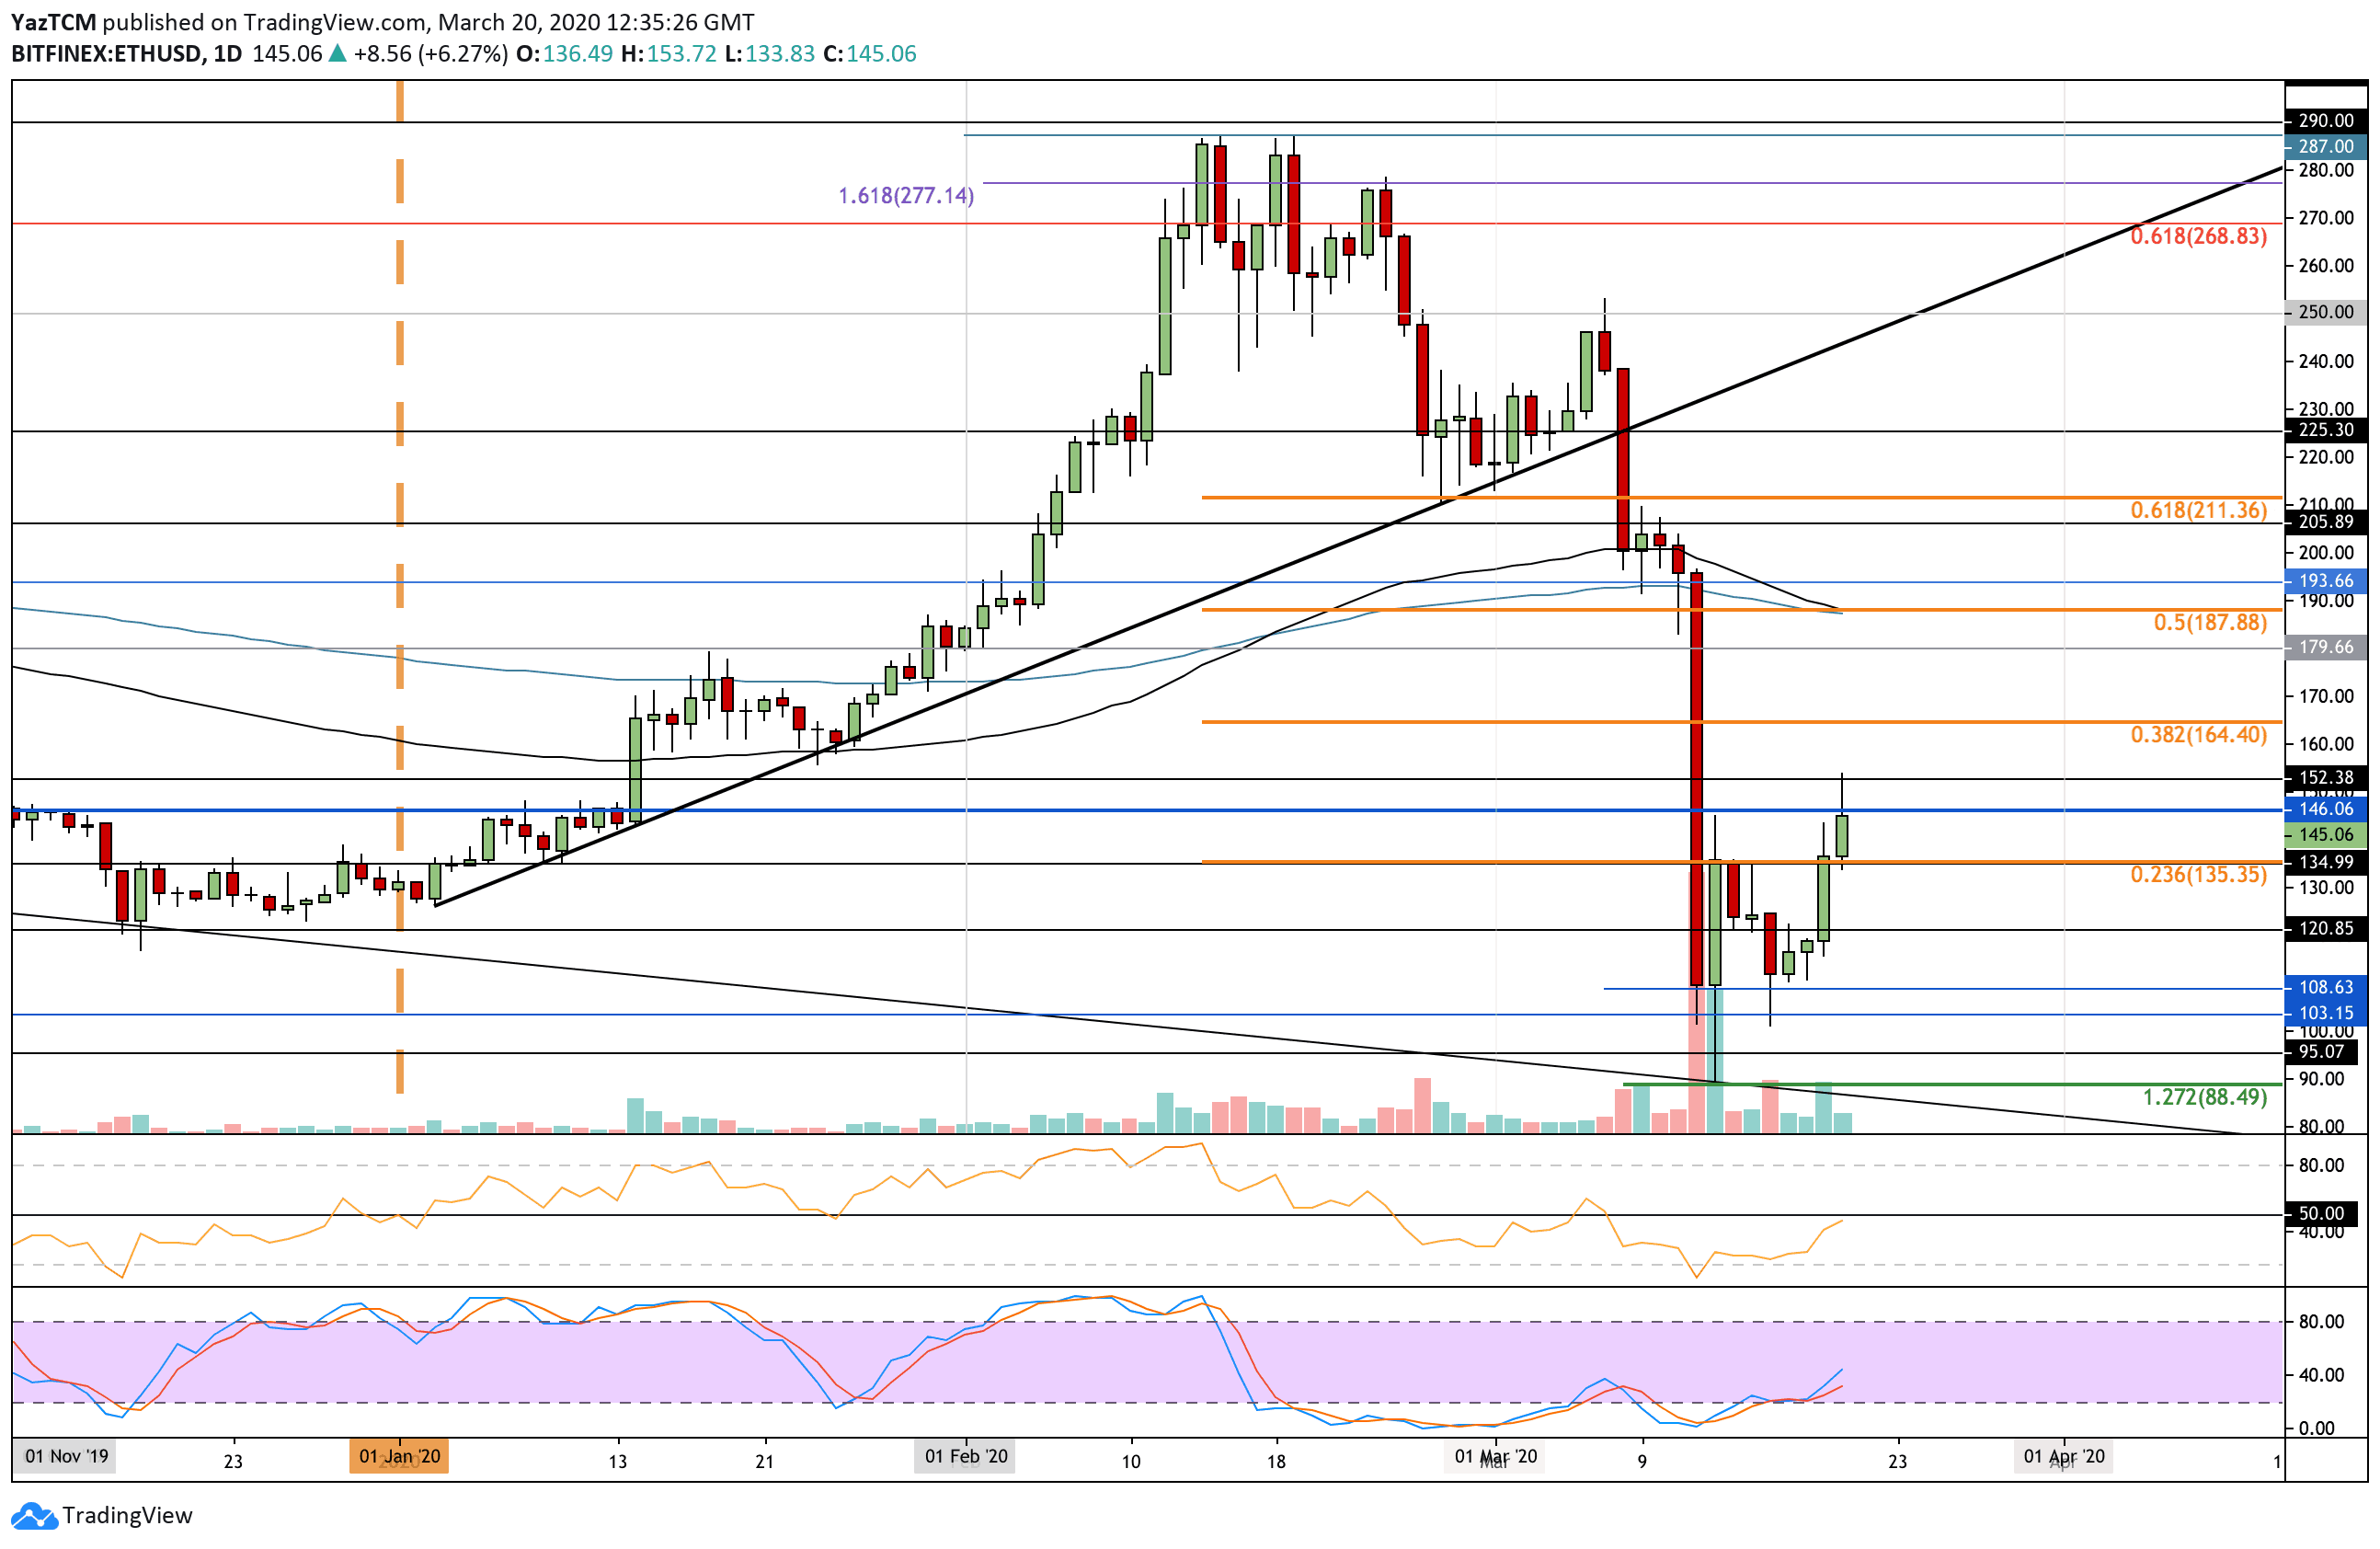 Crypto Price Analysis & Overview March 20th: Bitcoin, Ethereum, Ripple, Bitcoin Cash, and Chainlink